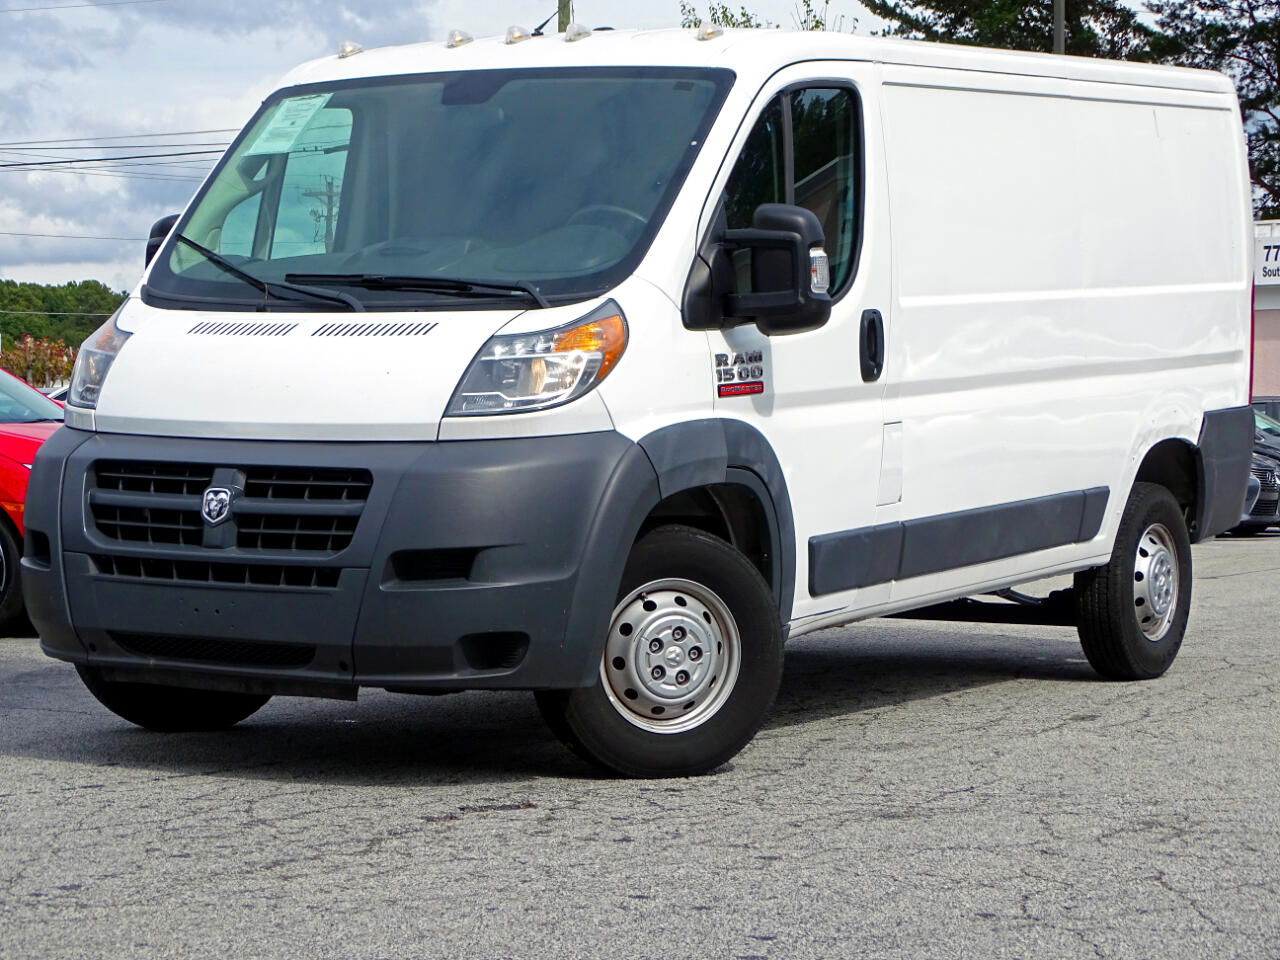 Used 2017 Ram Promaster Cargo Van For Sale In Stone Mountain